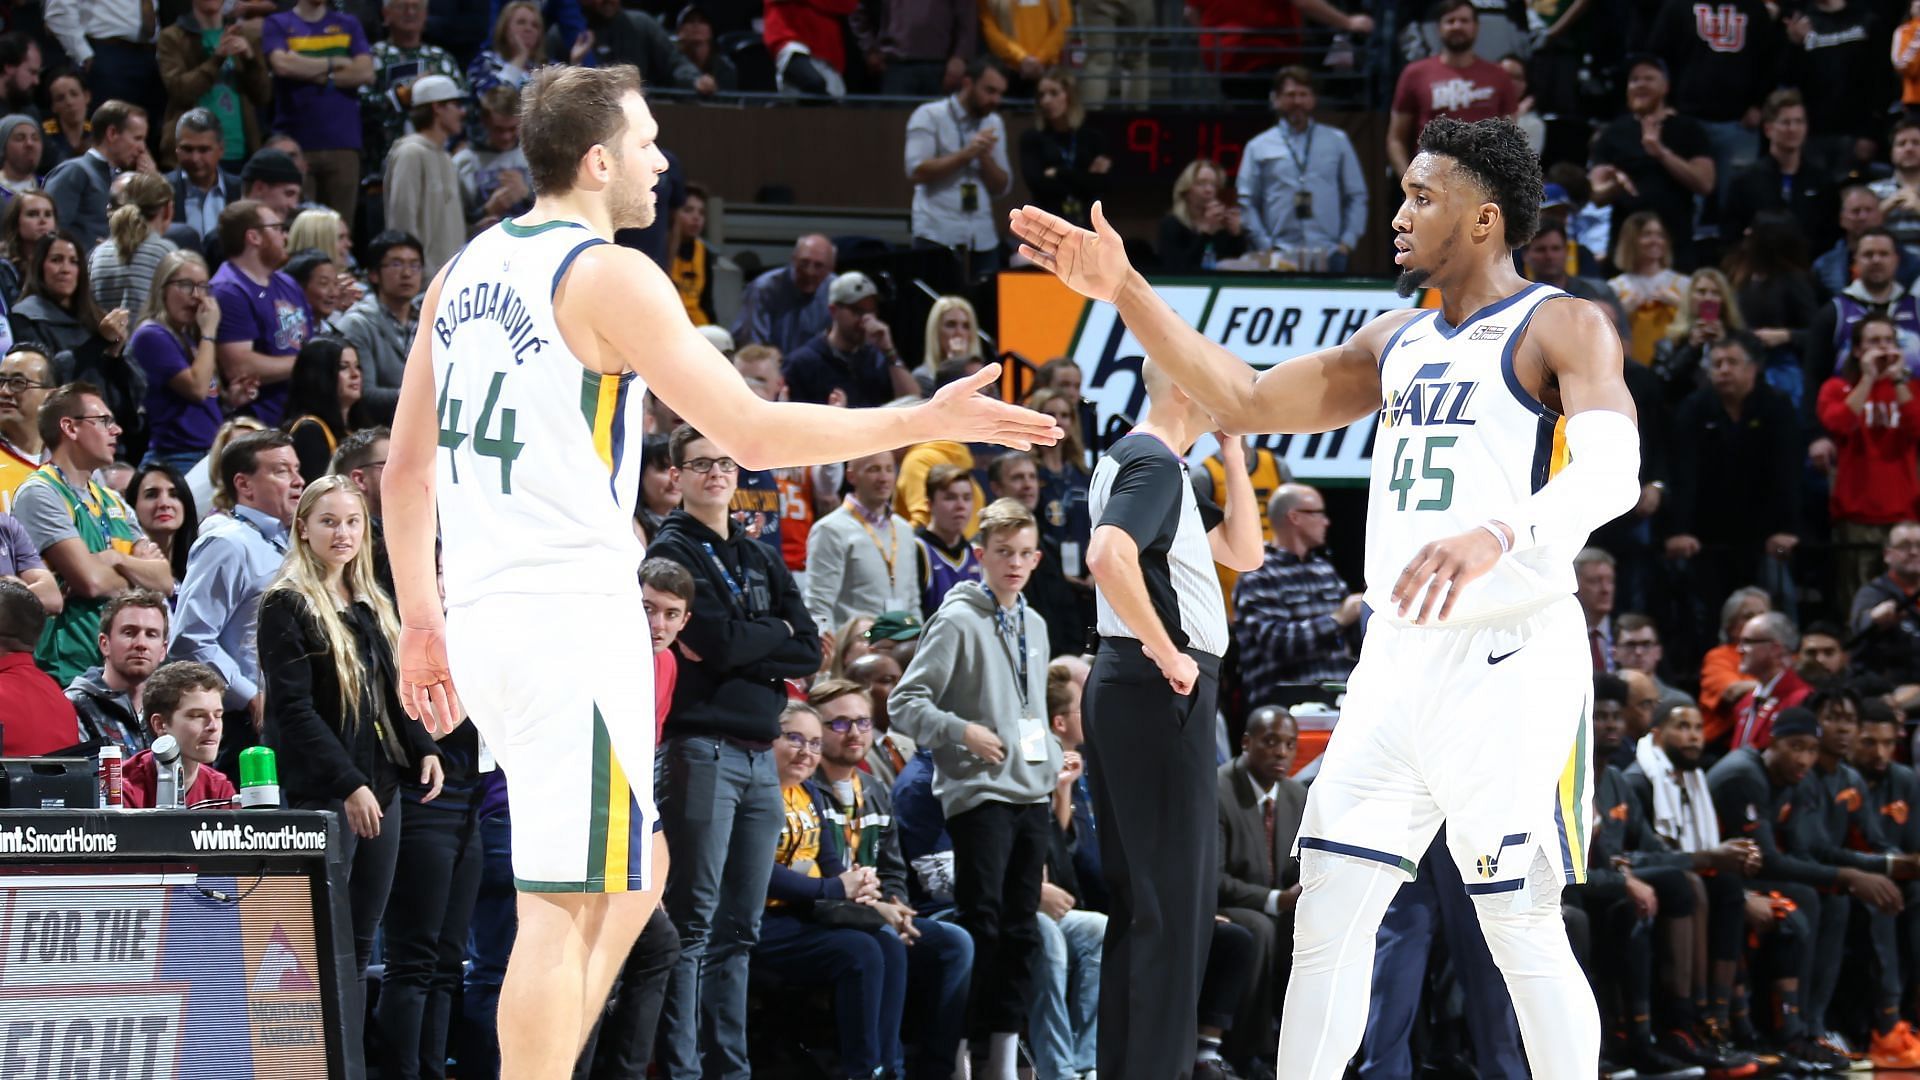 The Utah Jazz will miss two of their best scorers in Donavan Mitchell and Bojan Bogdanovic against the Clippers. [Photo: Sporting News]